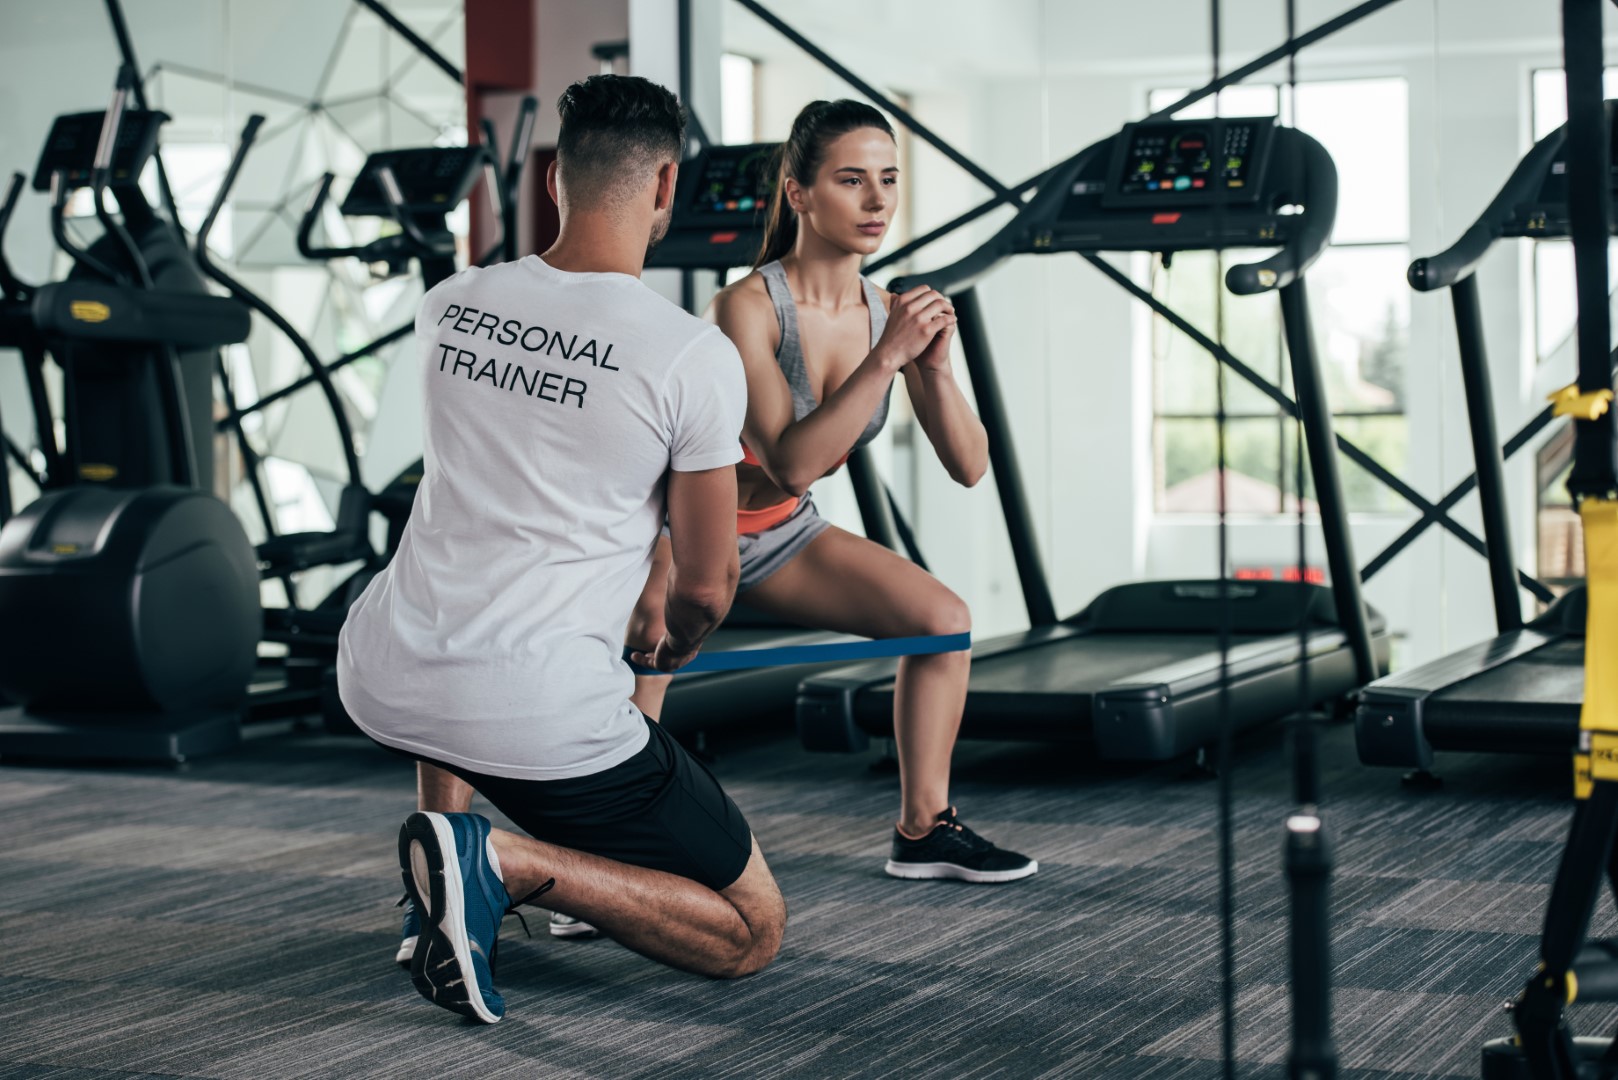 Top 5 Traits Of An Effective Personal Trainer